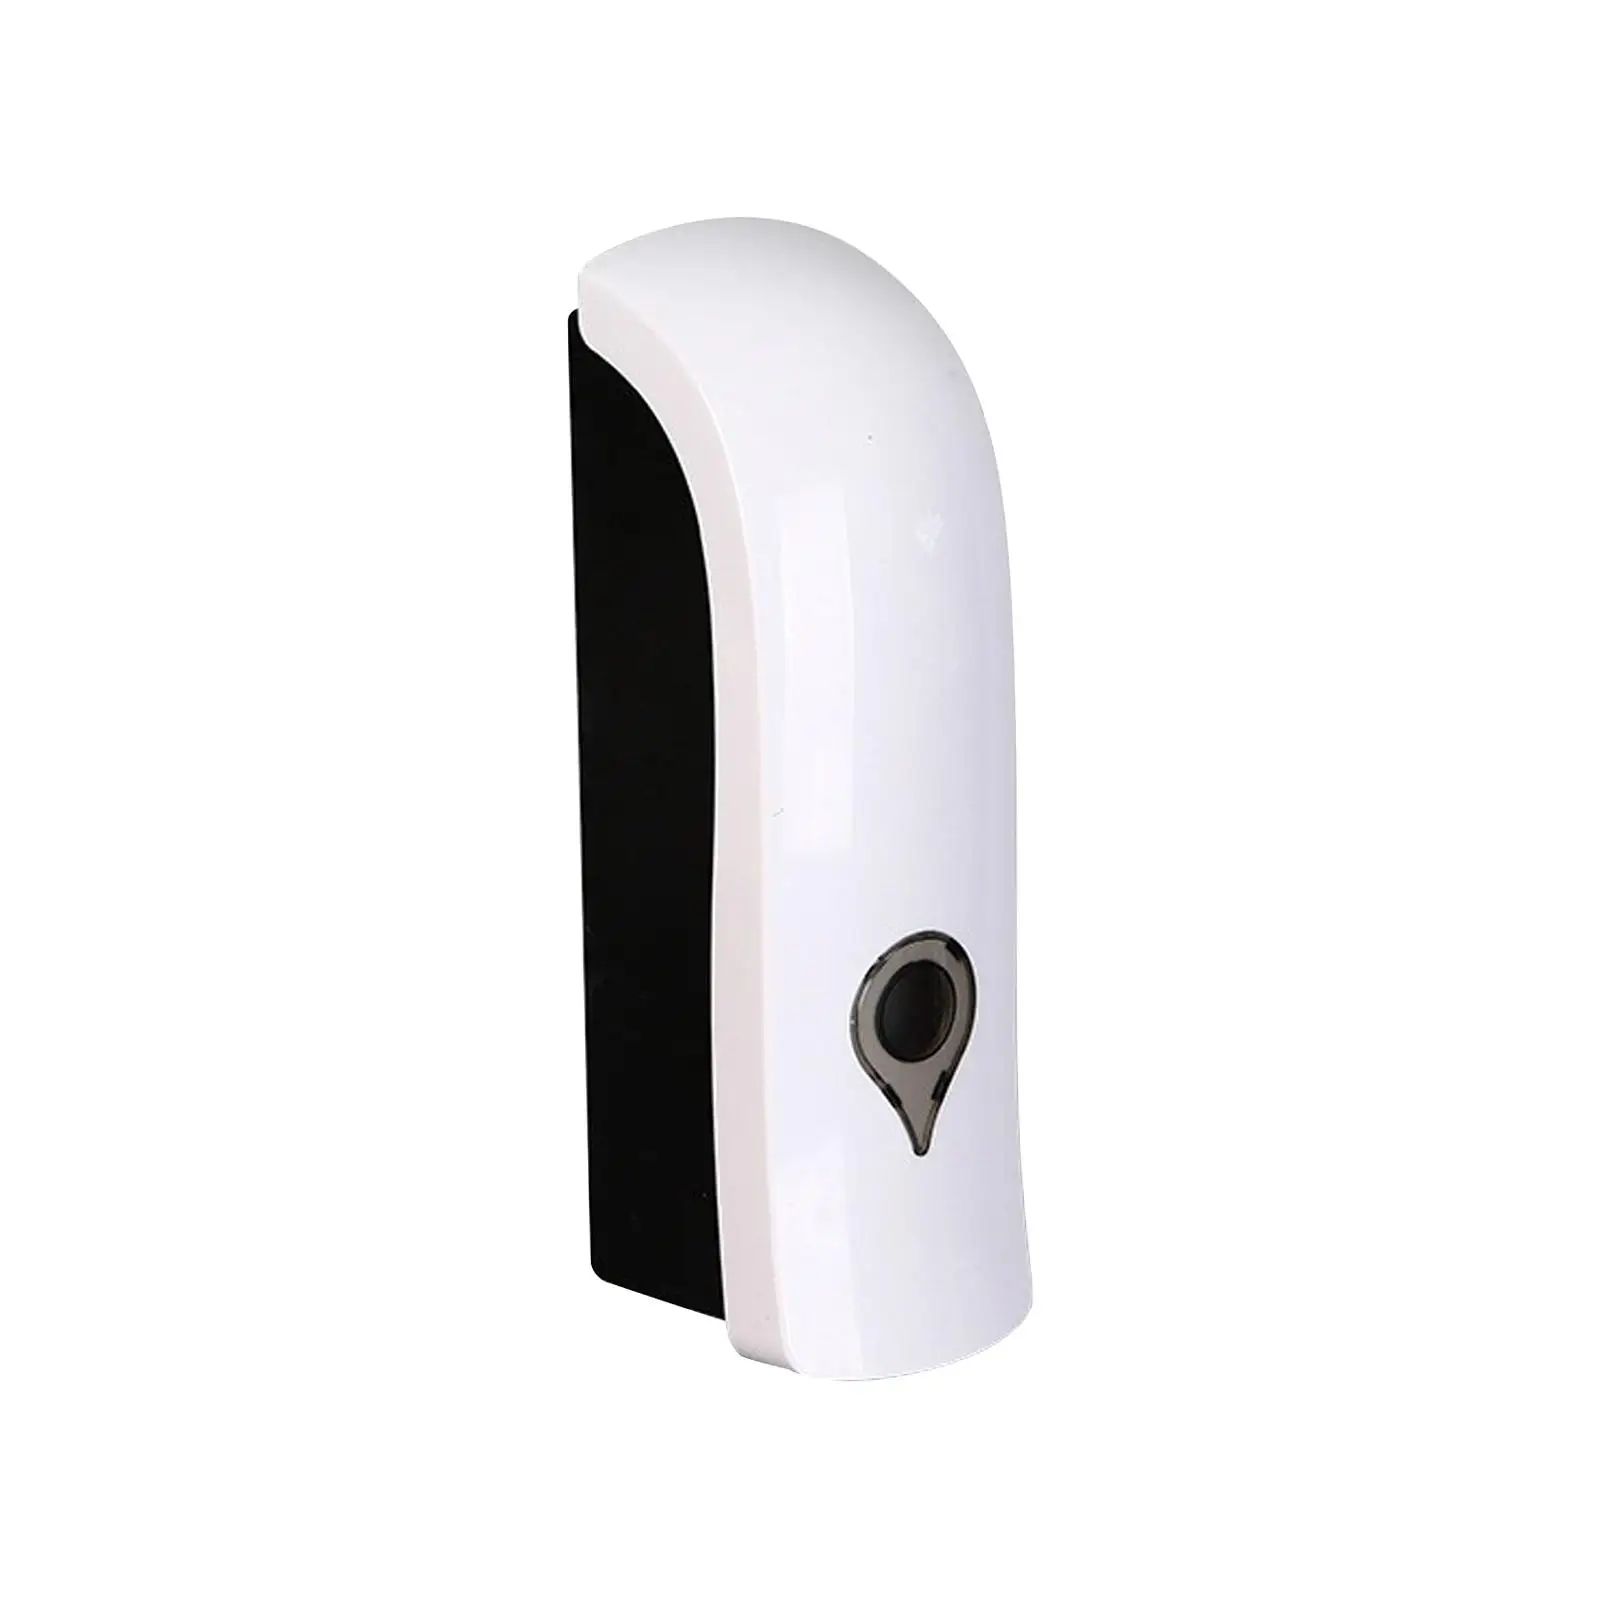 Wall Mounted Manual Soap Dispenser with Mounting Screw 300ml Shampoo Dispenser